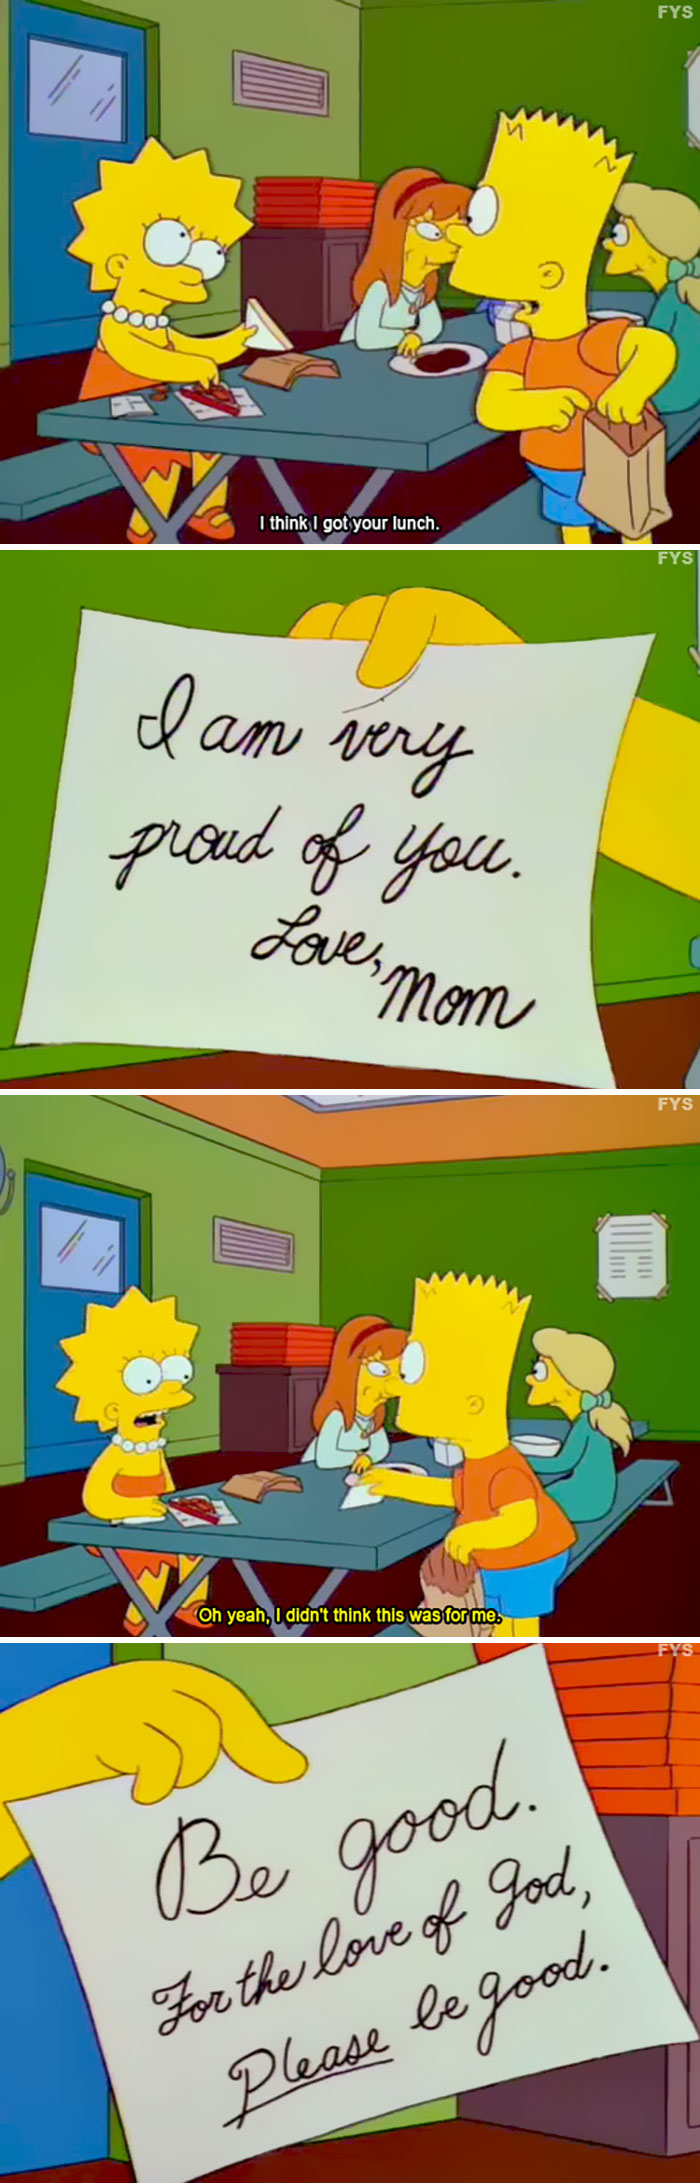 funny simpsons jokes - Fys I think I got your lunch. Fys I am very proud of you. Love, mom Fys Oh yeah, I didn't think this was for me. good. Be For the love of God, Please be good.